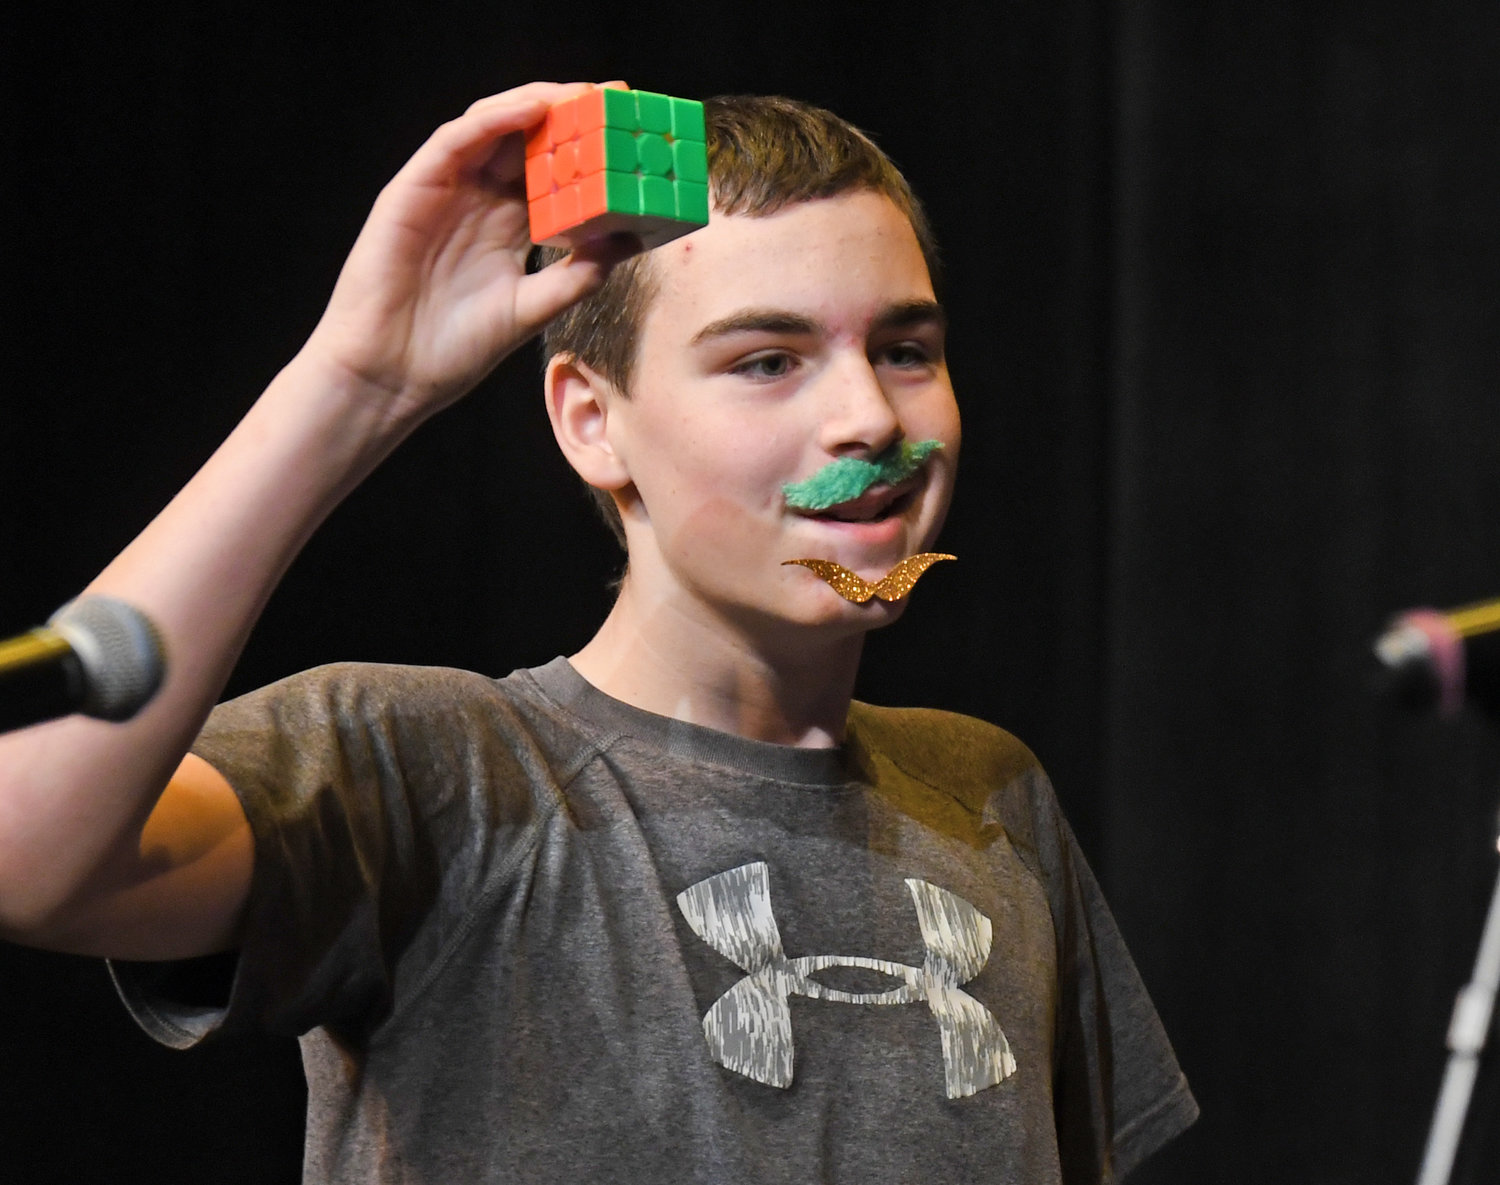 The Rubik's Cube World contest skit was one of the highlights during the student performance portion of the Chinese New Year celebration Friday, Feb. 3 in the Clinton Middle School auditorium.